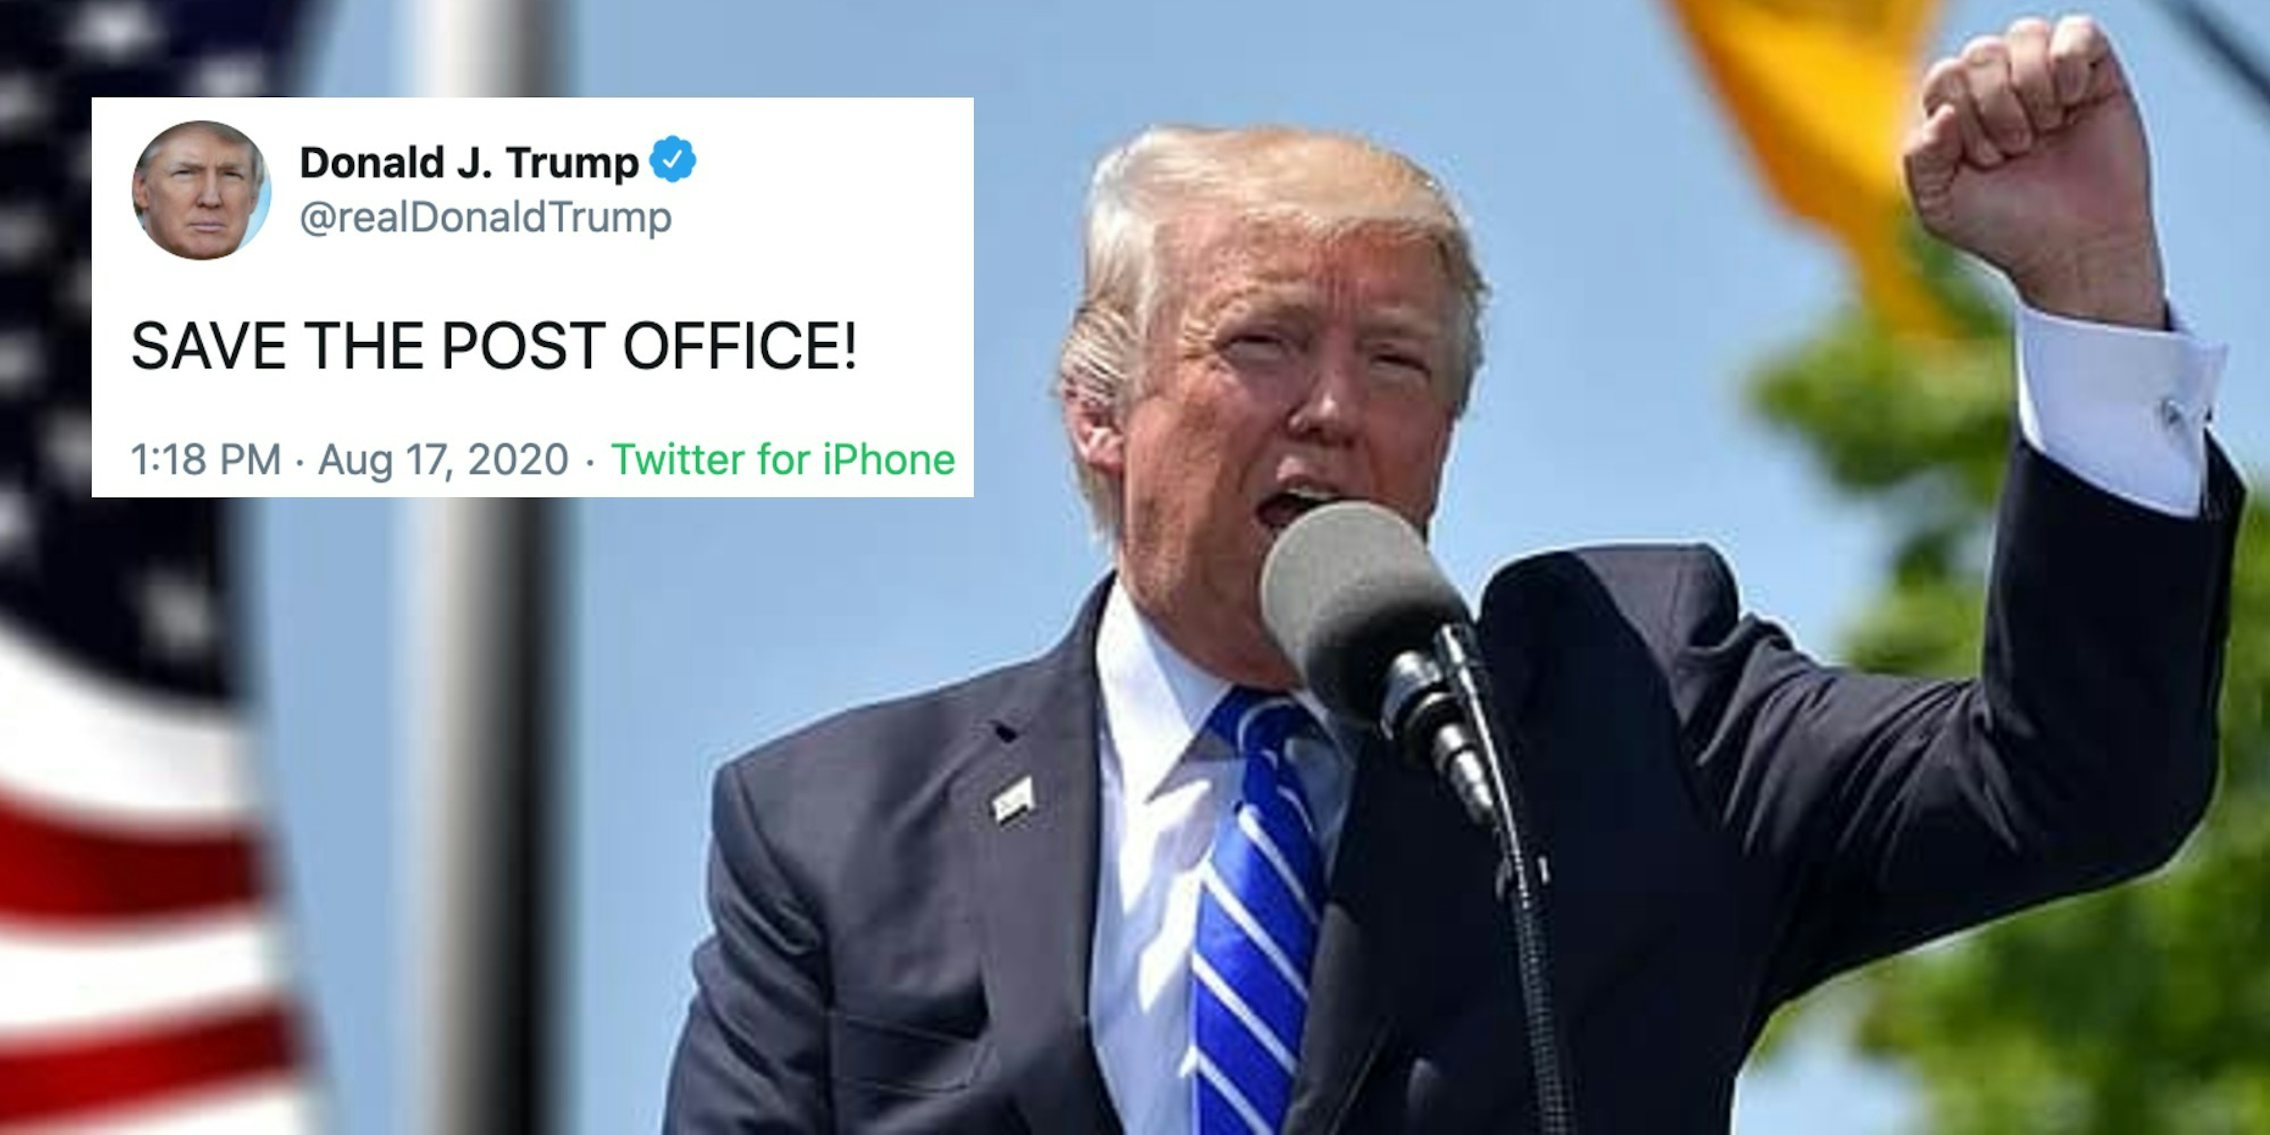 Donald Trump next to a tweet about the Post Office